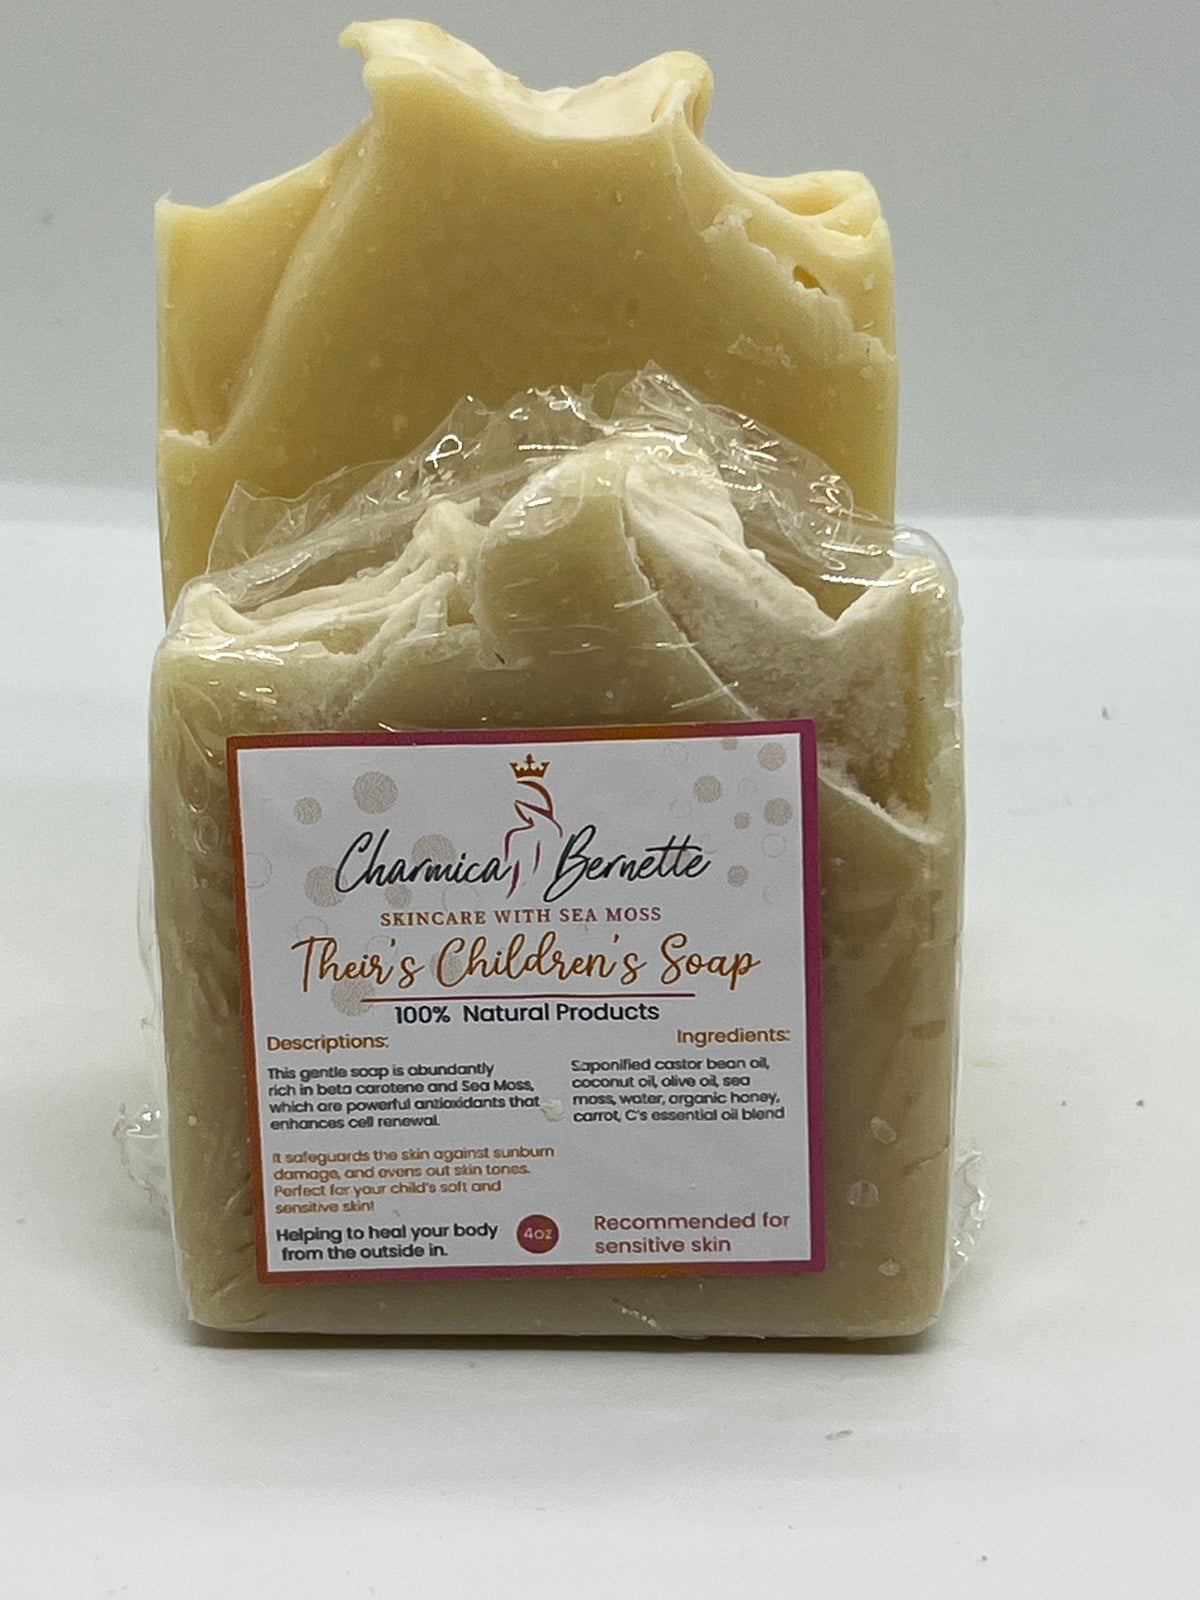 “Theirs” + Sea Moss Soap- For The Children